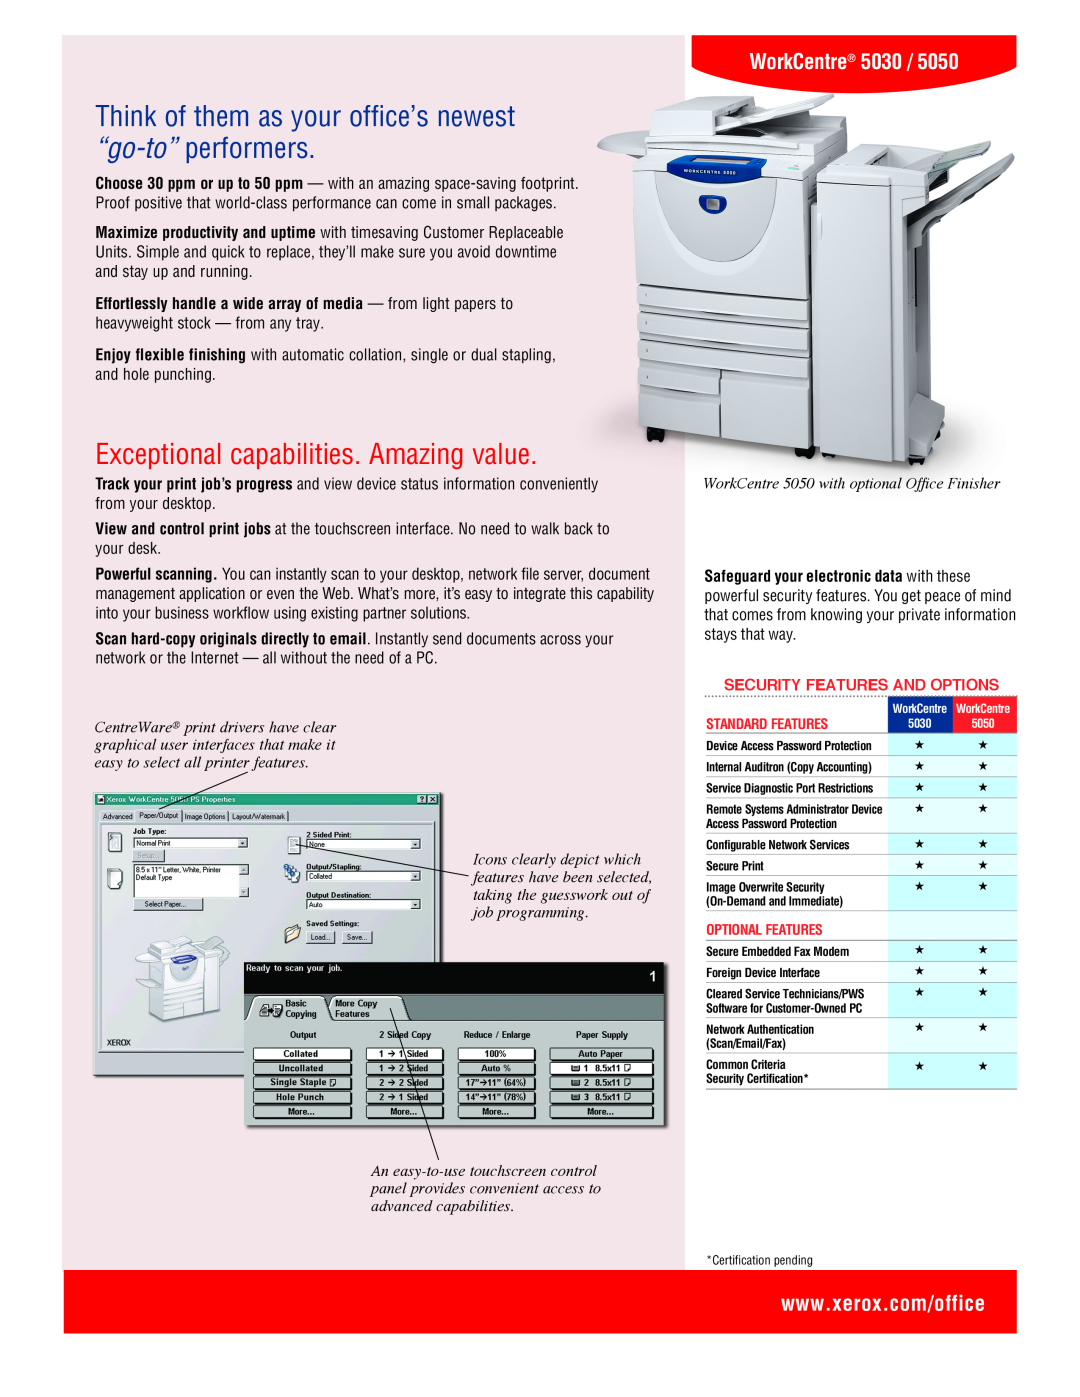 Xerox 5050 Think of them as your office’s newest “go-to” performers, Exceptional capabilities. Amazing value, WorkCentre 